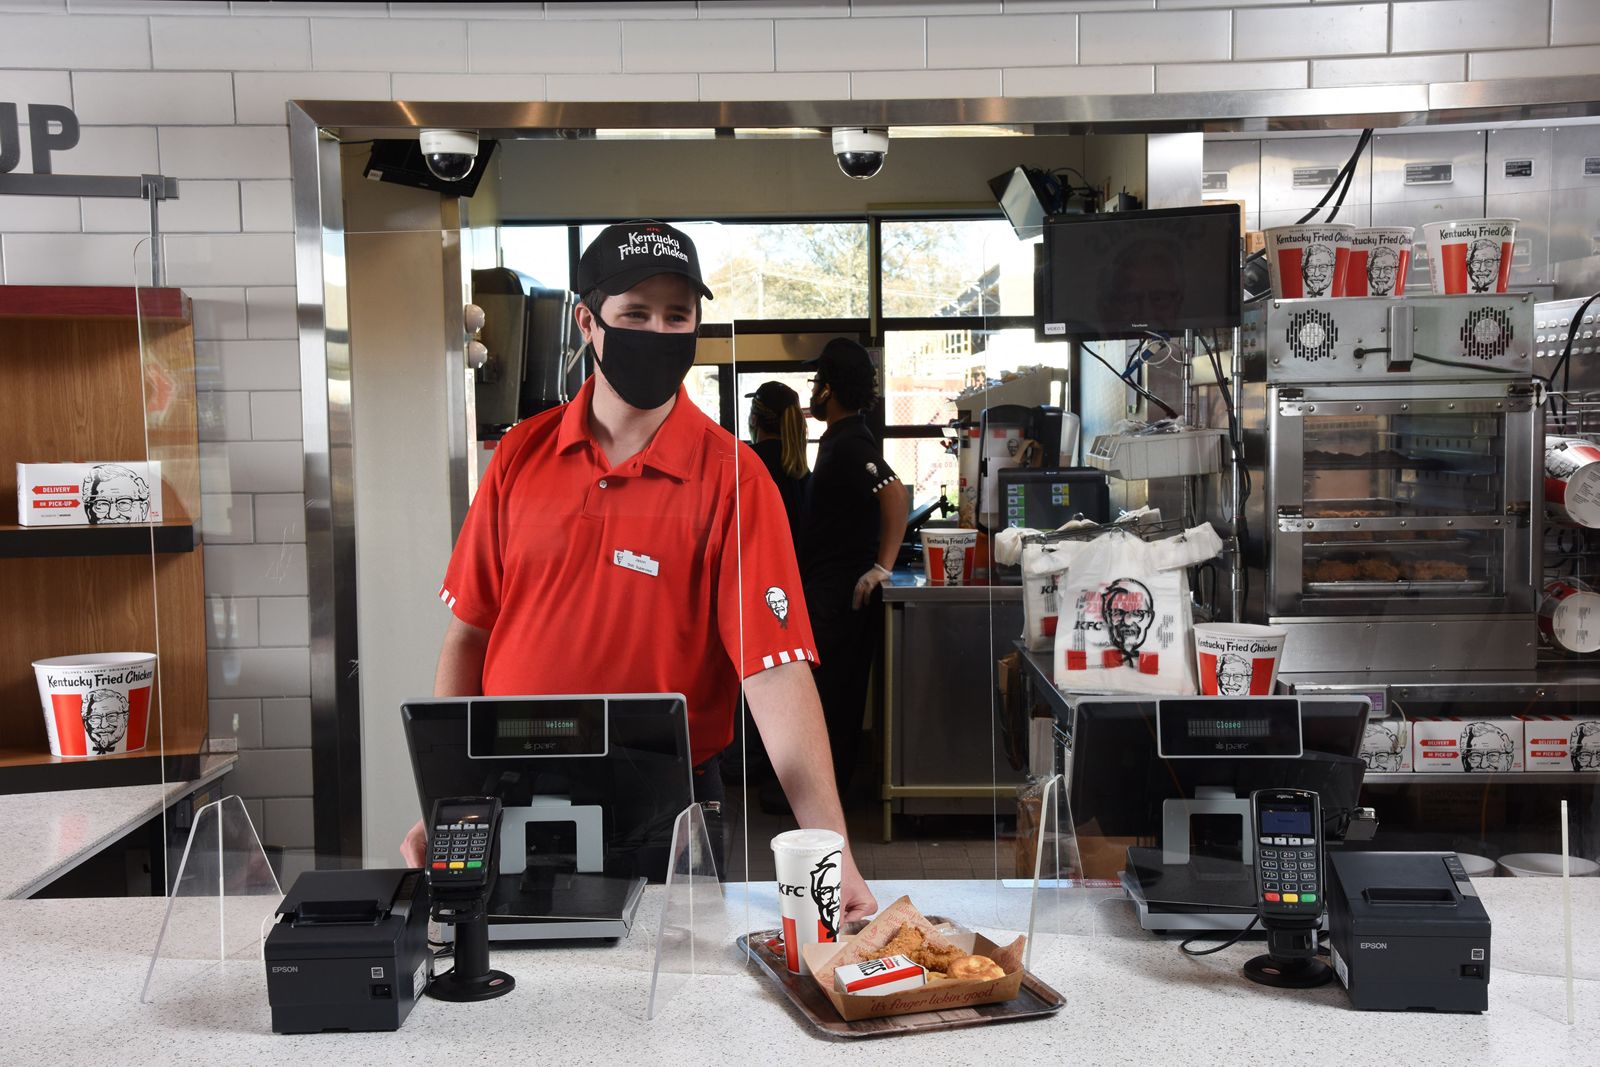 KFC and Franchisees Hiring 20,000 Restaurant Employees